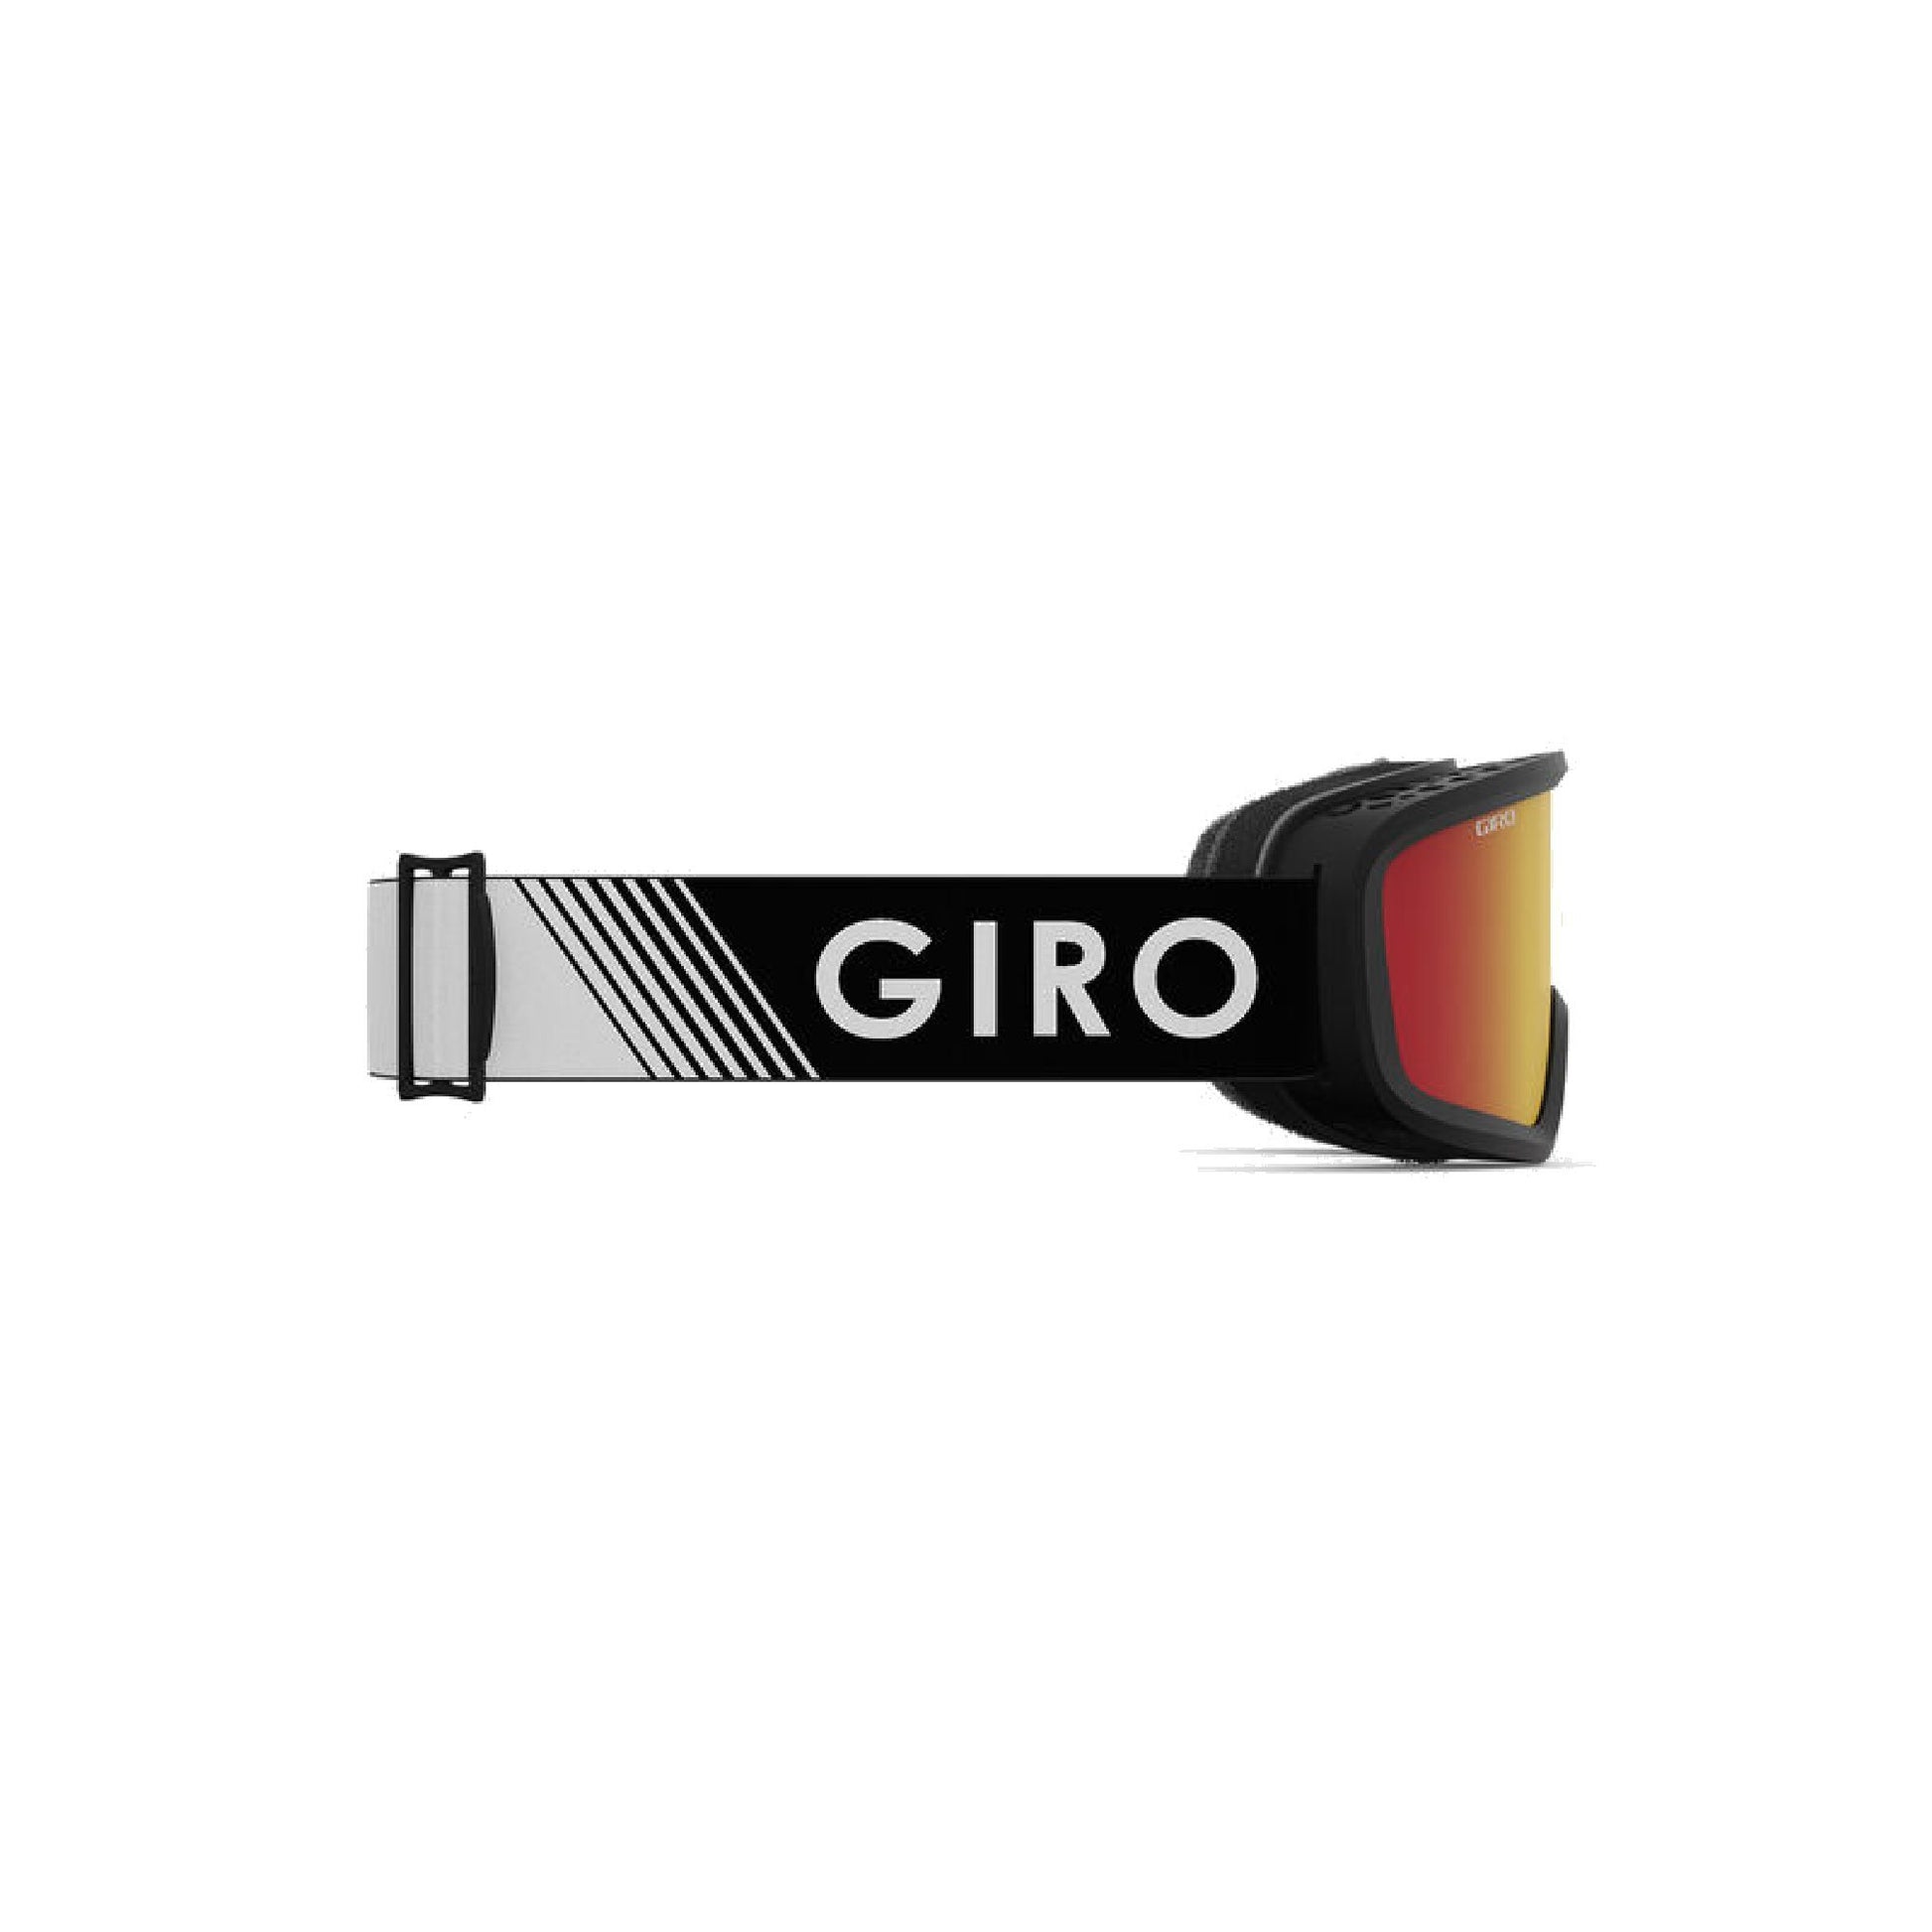 Giro Youth Chico 2.0 Snow Goggles Black Zoom Amber Scarlet Snow Goggles